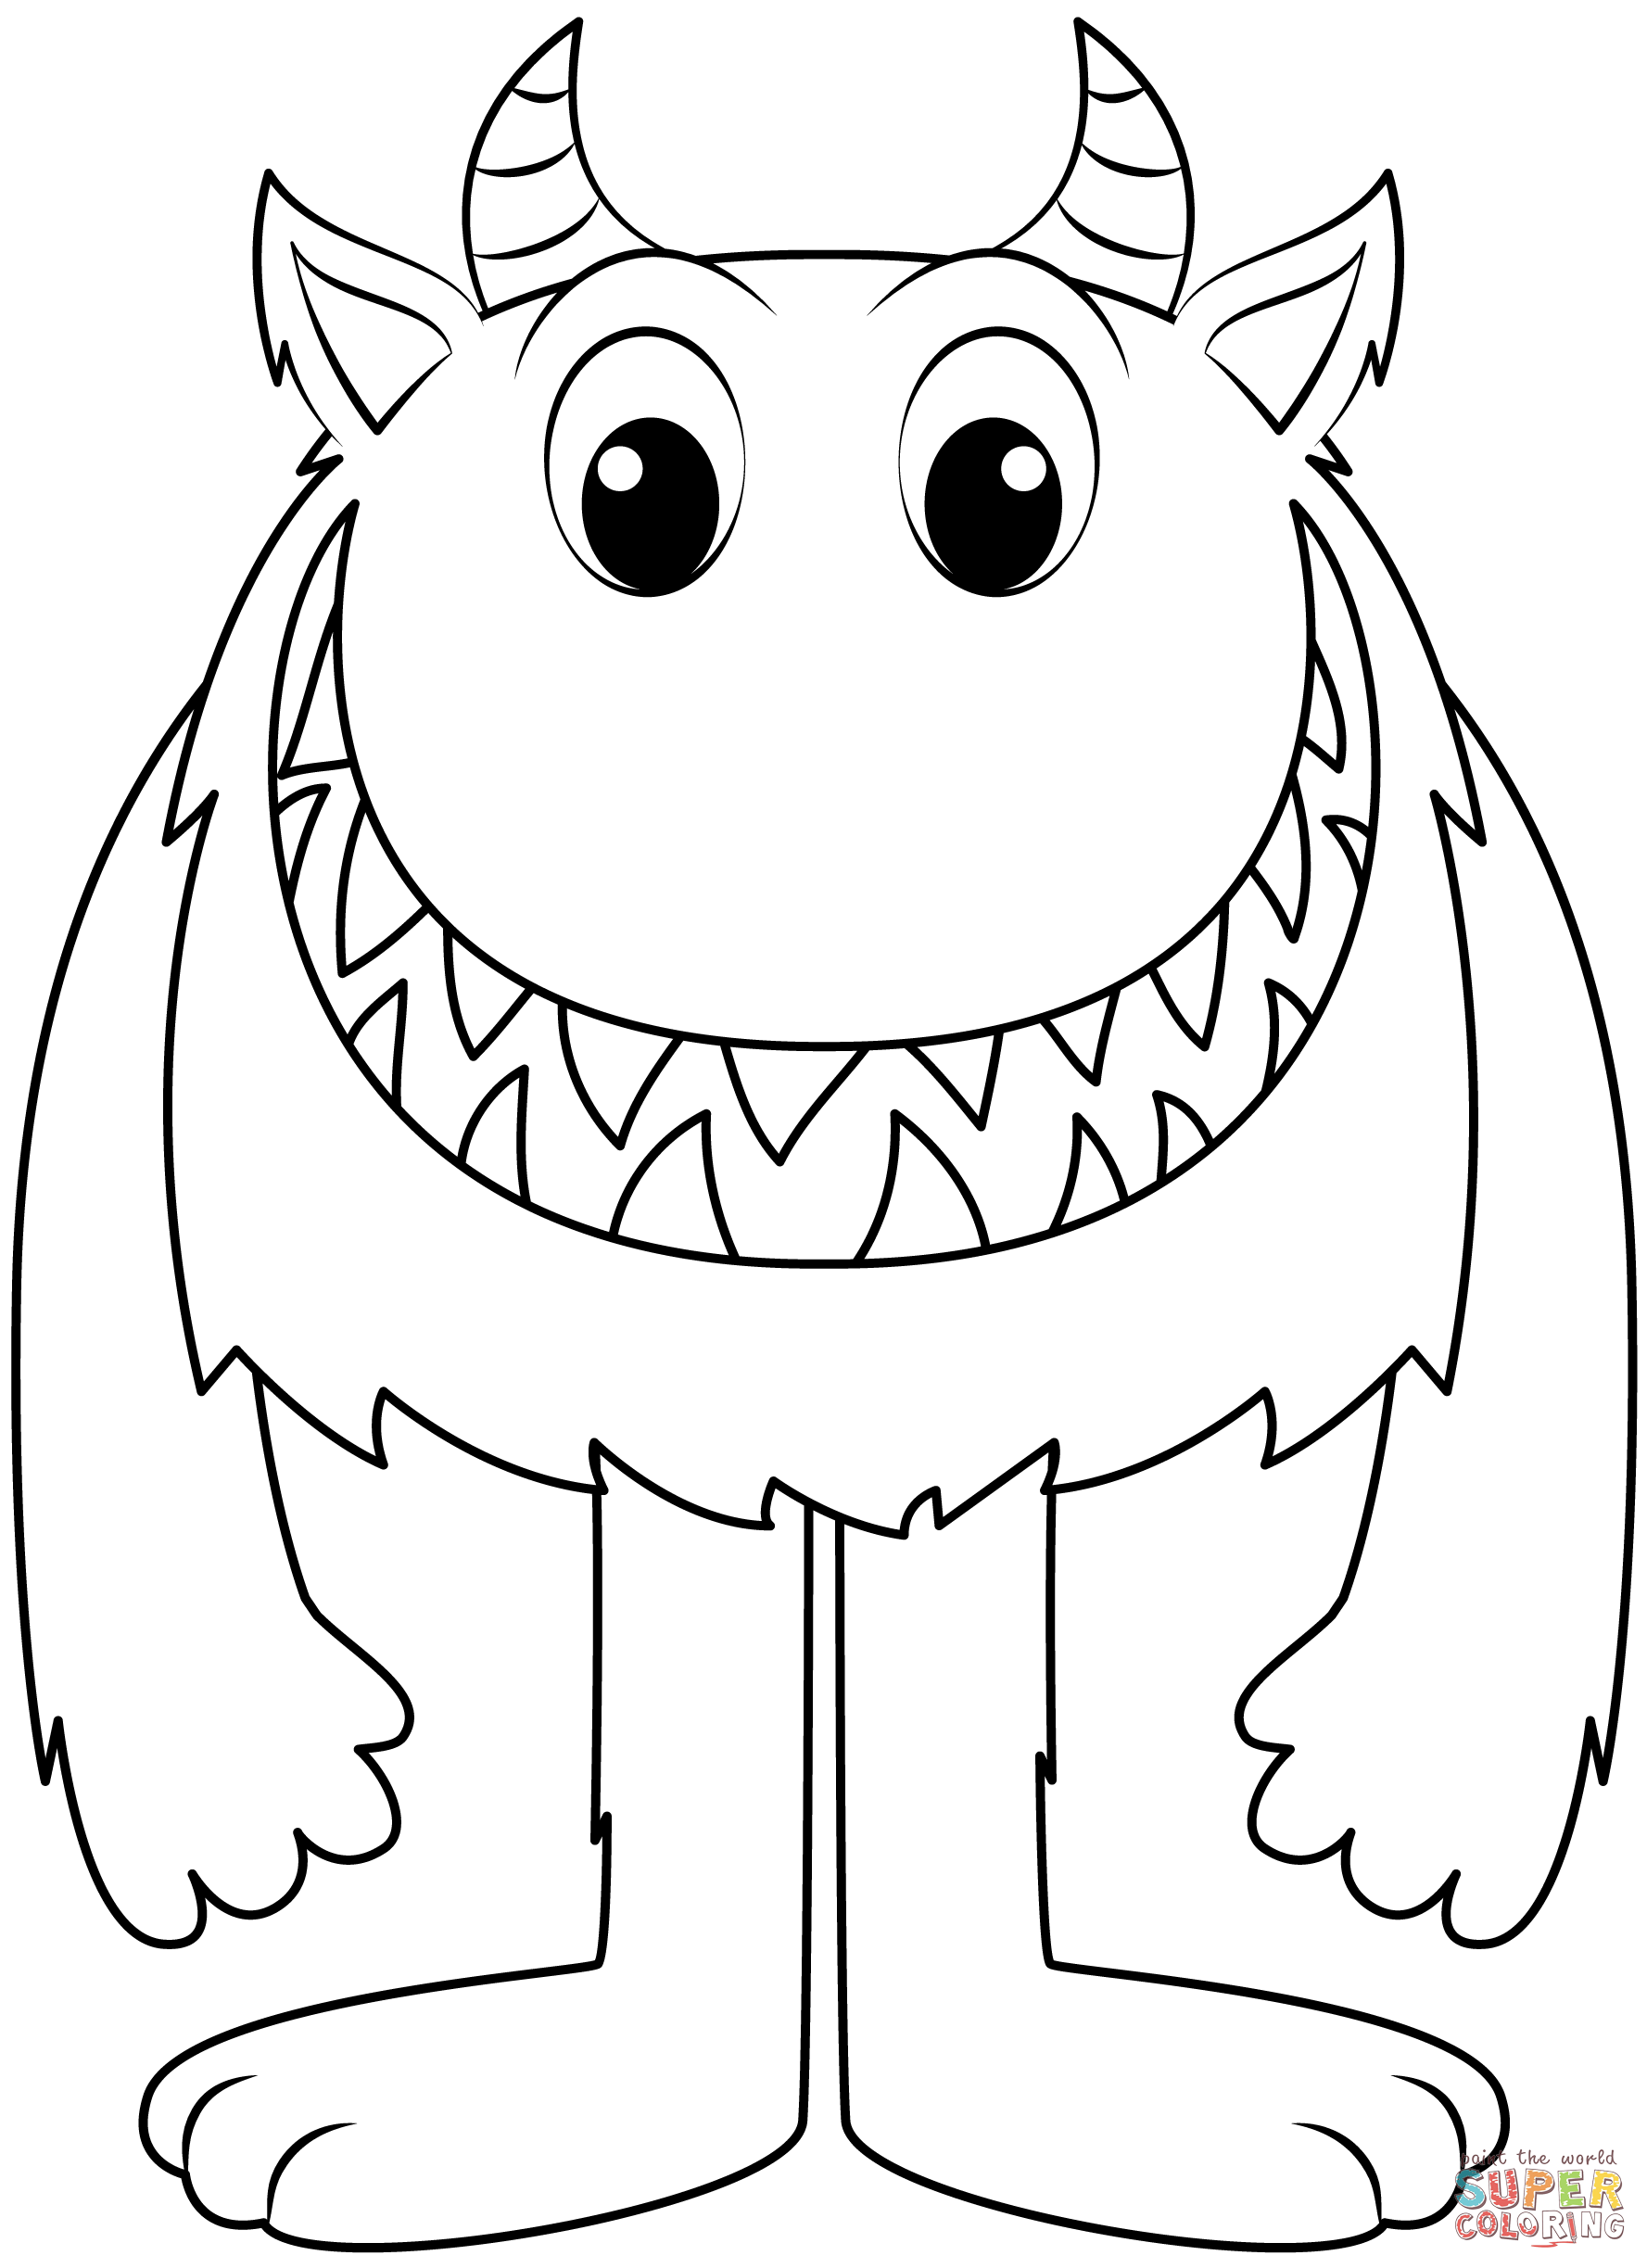 Free Coloring Pages Monsters